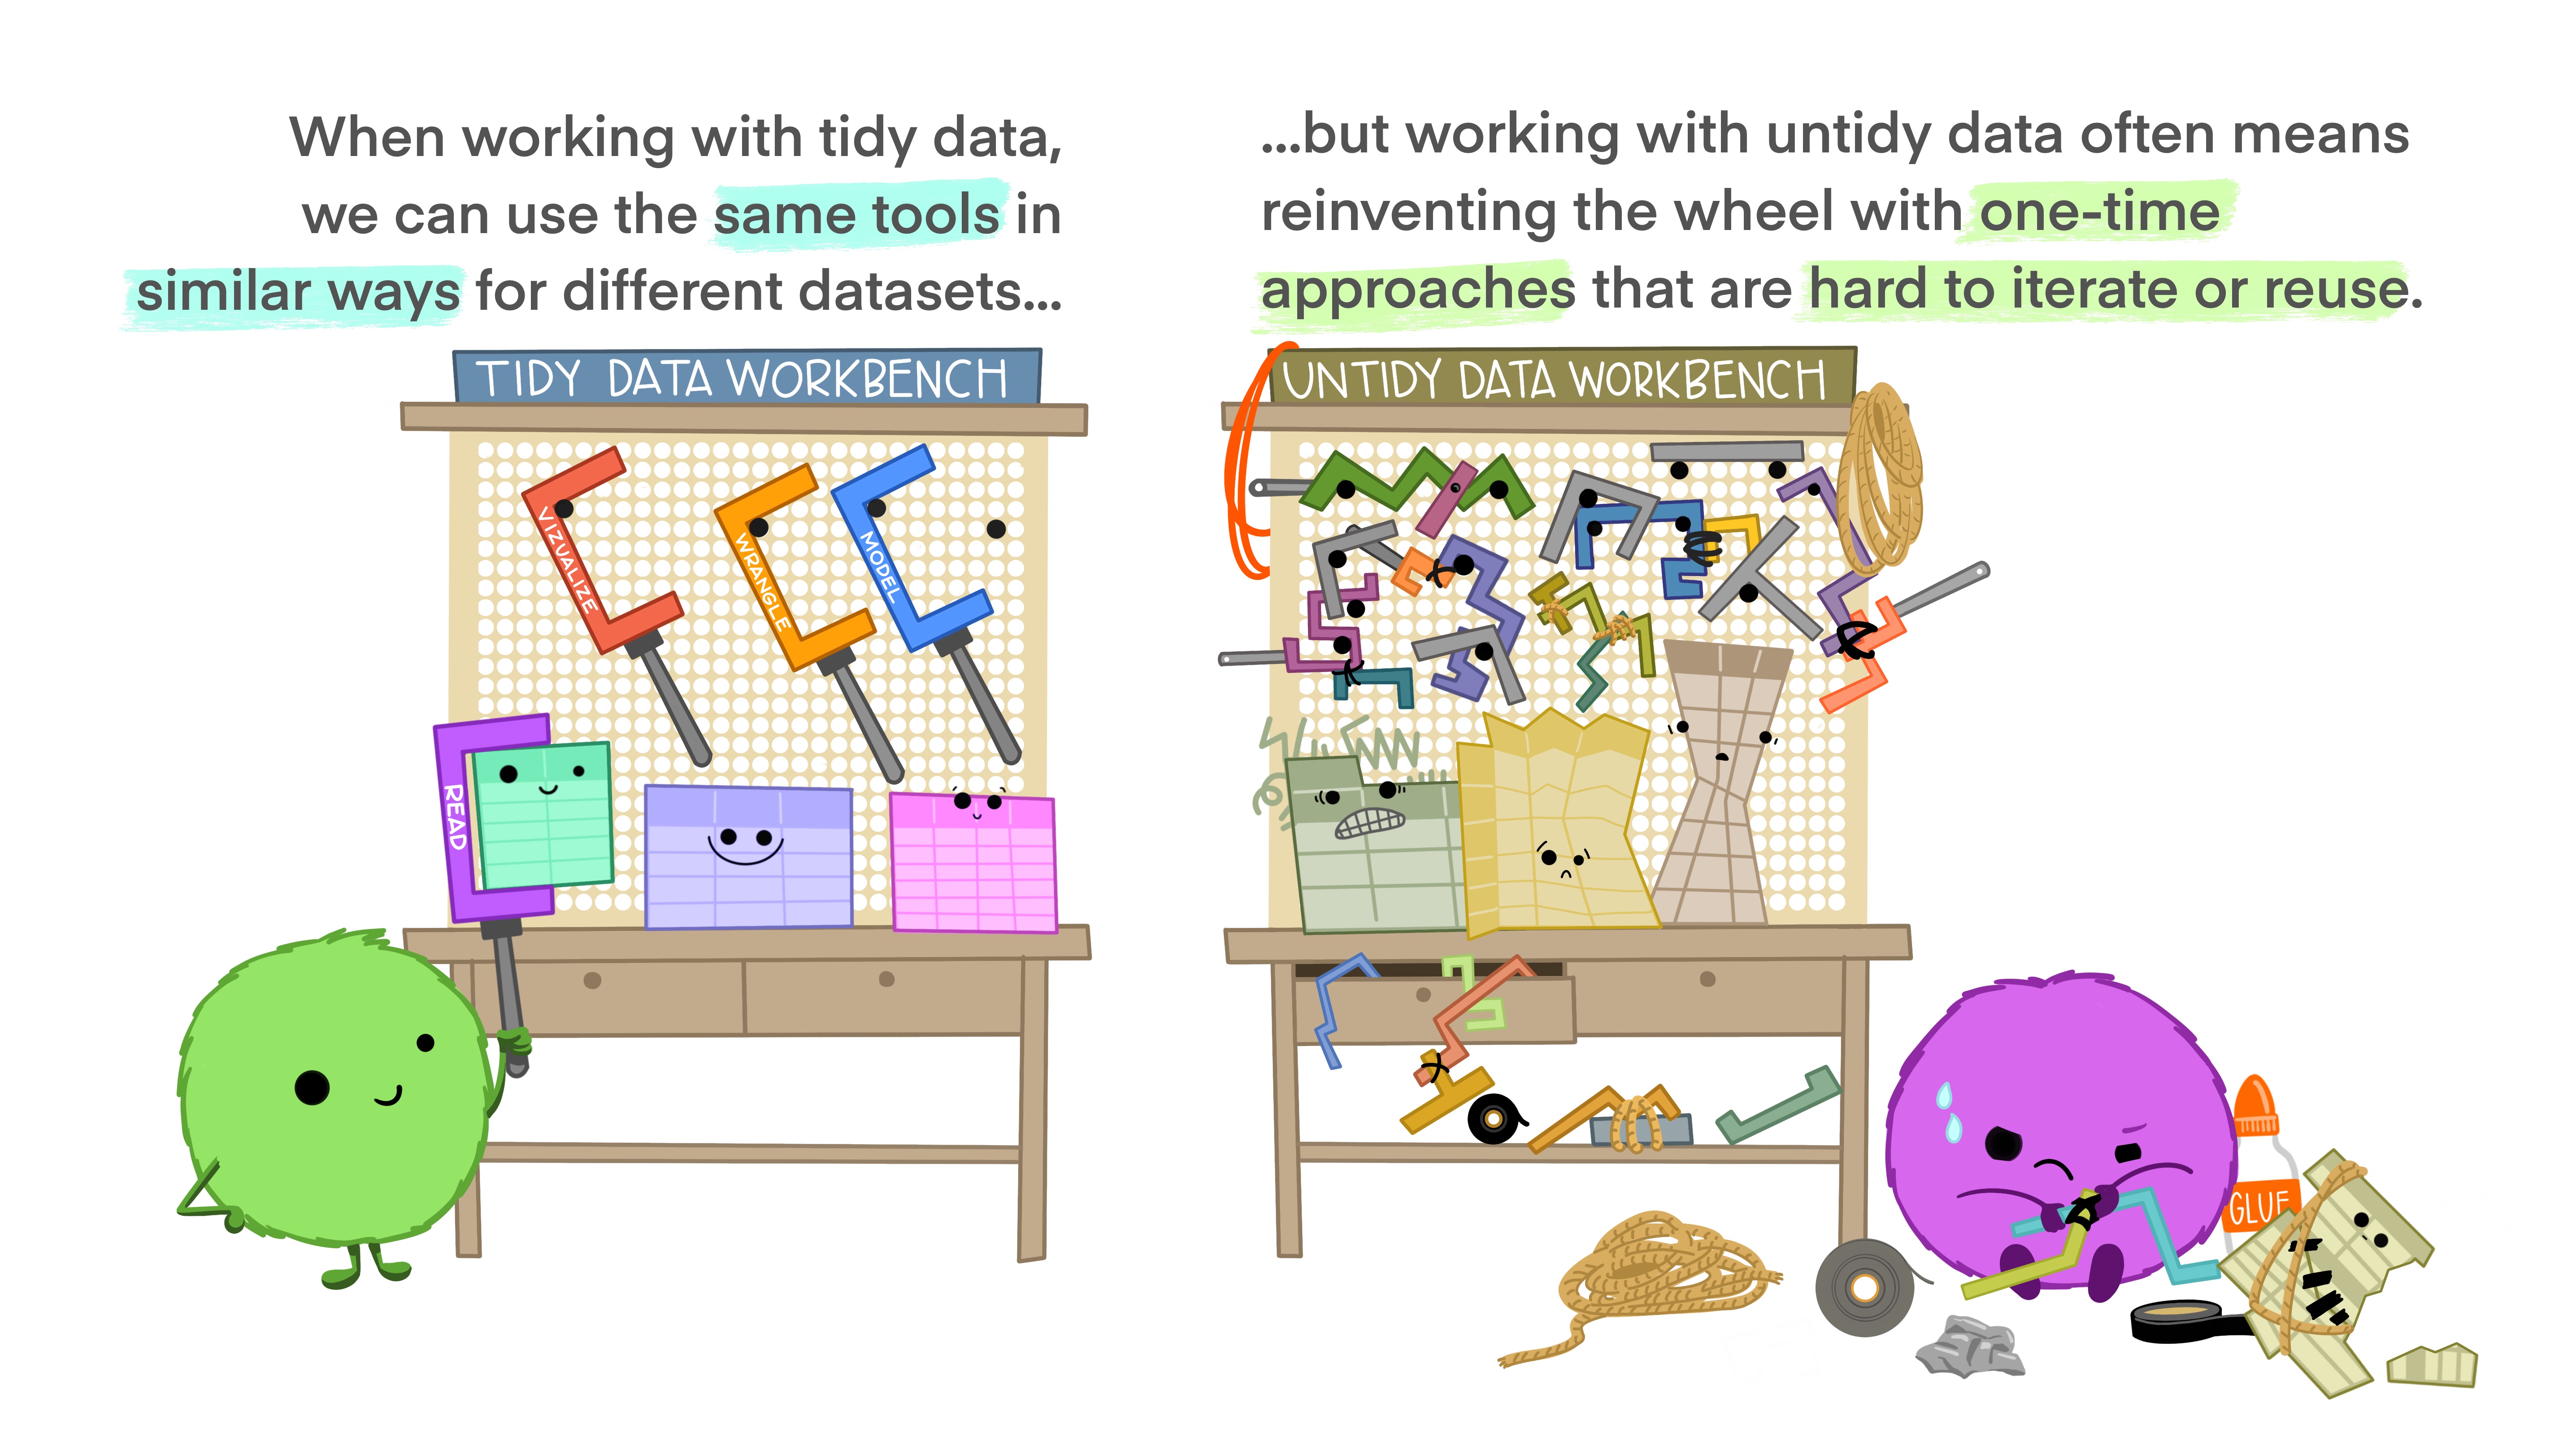 On the left is a happy cute fuzzy monster holding a rectangular data frame with a tool that fits the data frame shape. On the workbench behind the monster are other data frames of similar rectangular shape, and neatly arranged tools that also look like they would fit those data frames. The workbench looks uncluttered and tidy. The text above the tidy workbench reads “When working with tidy data, we can use the same tools in similar ways for different datasets…” On the right is a cute monster looking very frustrated, using duct tape and other tools to haphazardly tie data tables together, each in a different way. The monster is in front of a messy, cluttered workbench. The text above the frustrated monster reads “...but working with untidy data often means reinventing the wheel with one-time approaches that are hard to iterate or reuse.”